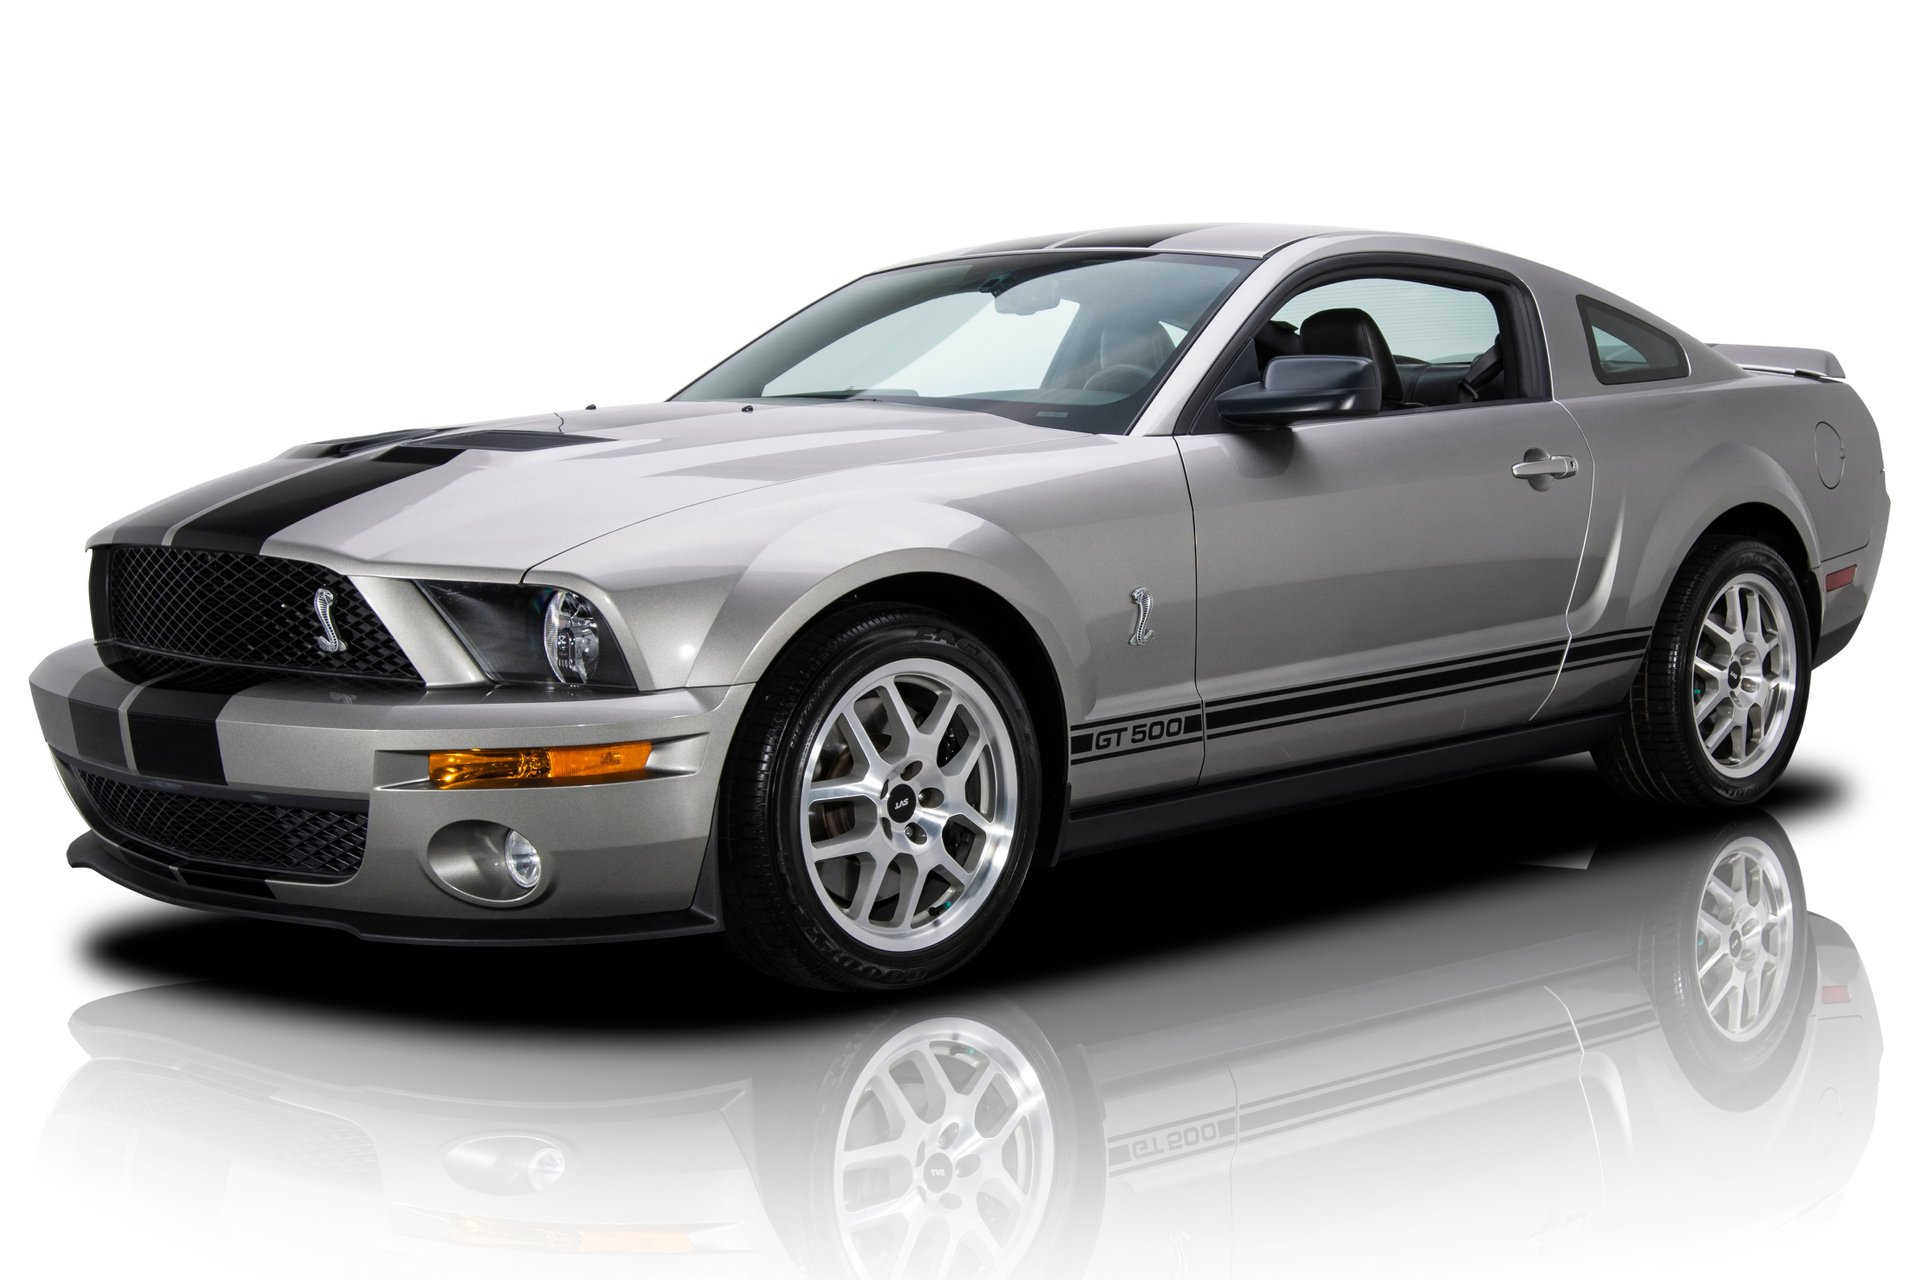 136817 2009 Ford Mustang RK Motors Classic Cars and Muscle Cars for Sale